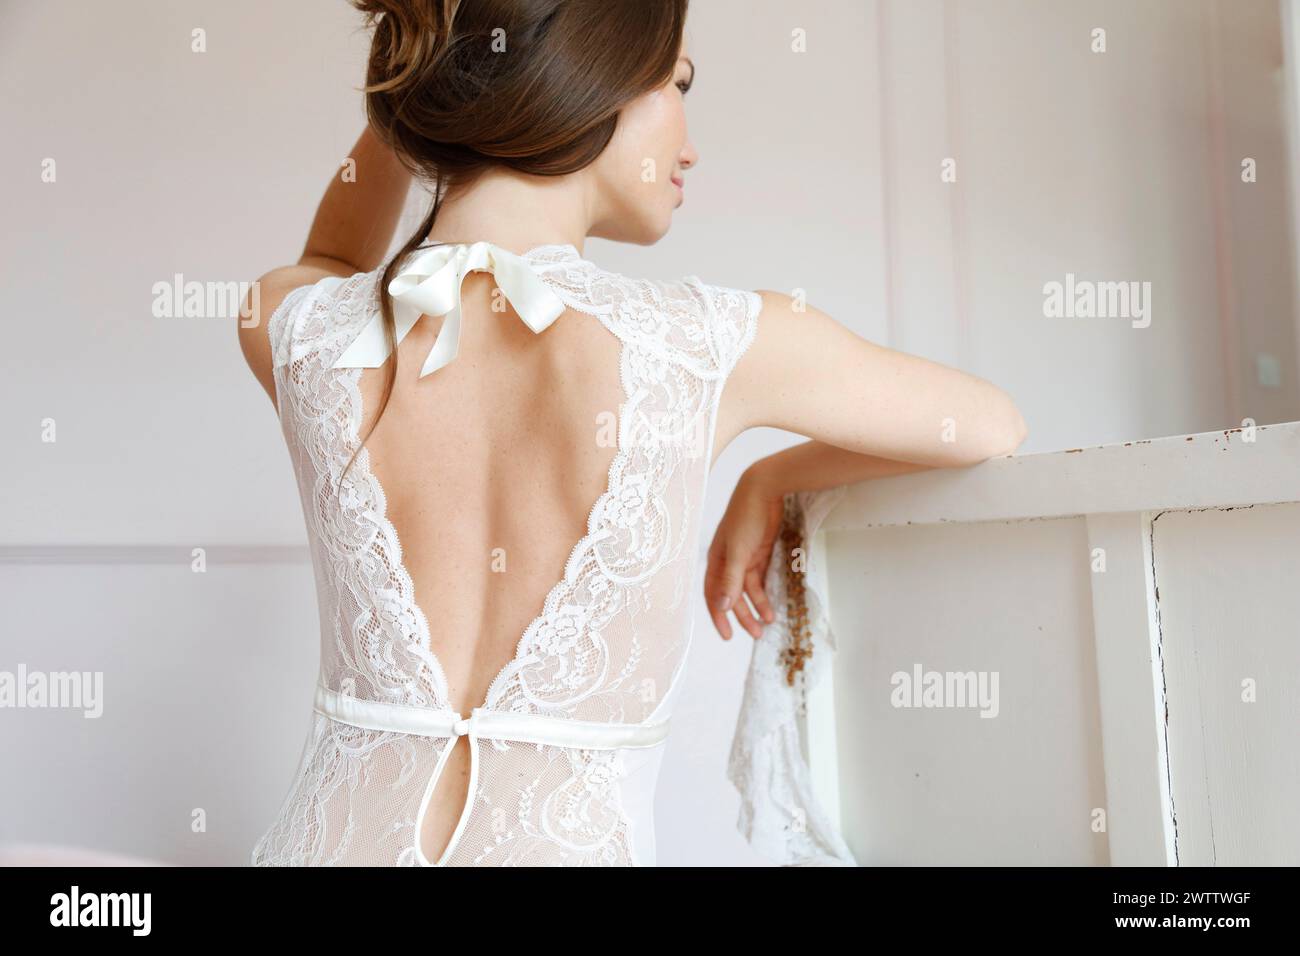 Woman in a lace bridal gown looking away Stock Photo